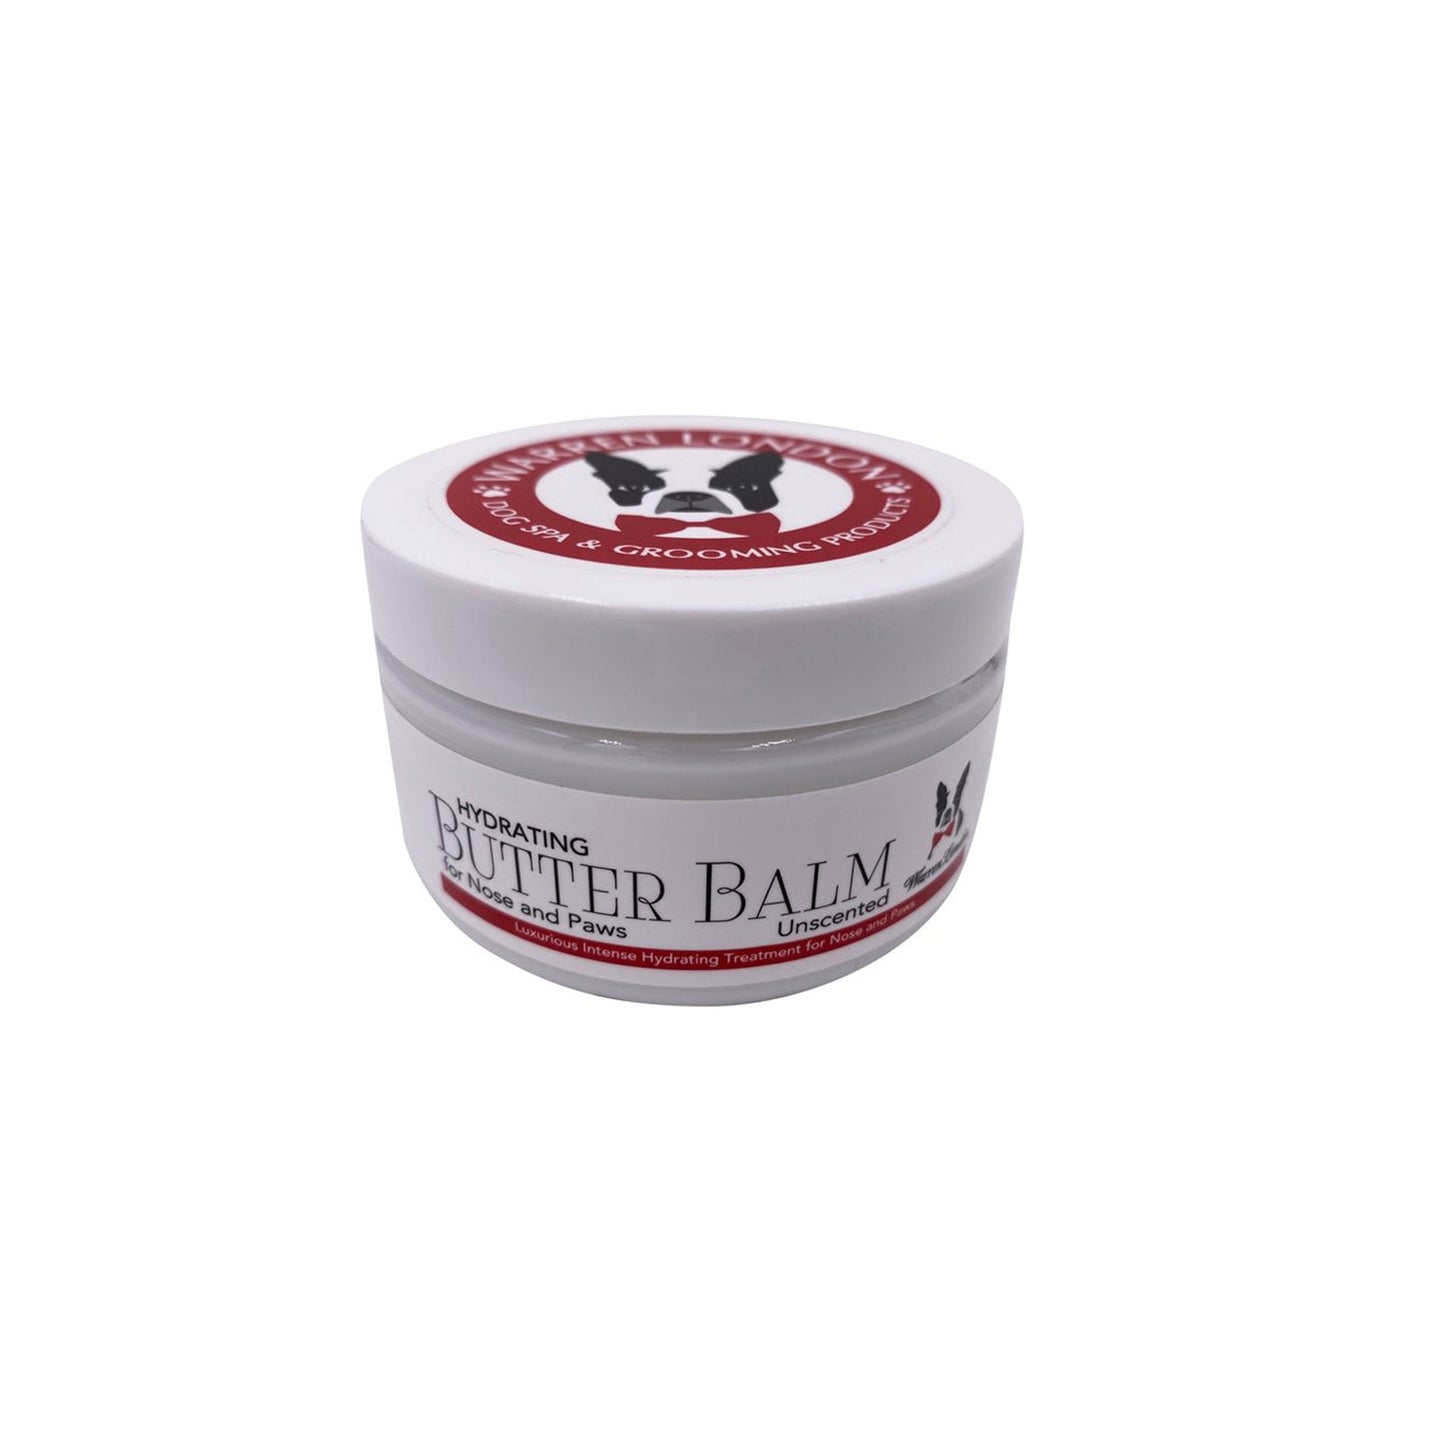 Hydrating Butter Balm For Nose & Paws - 4 oz